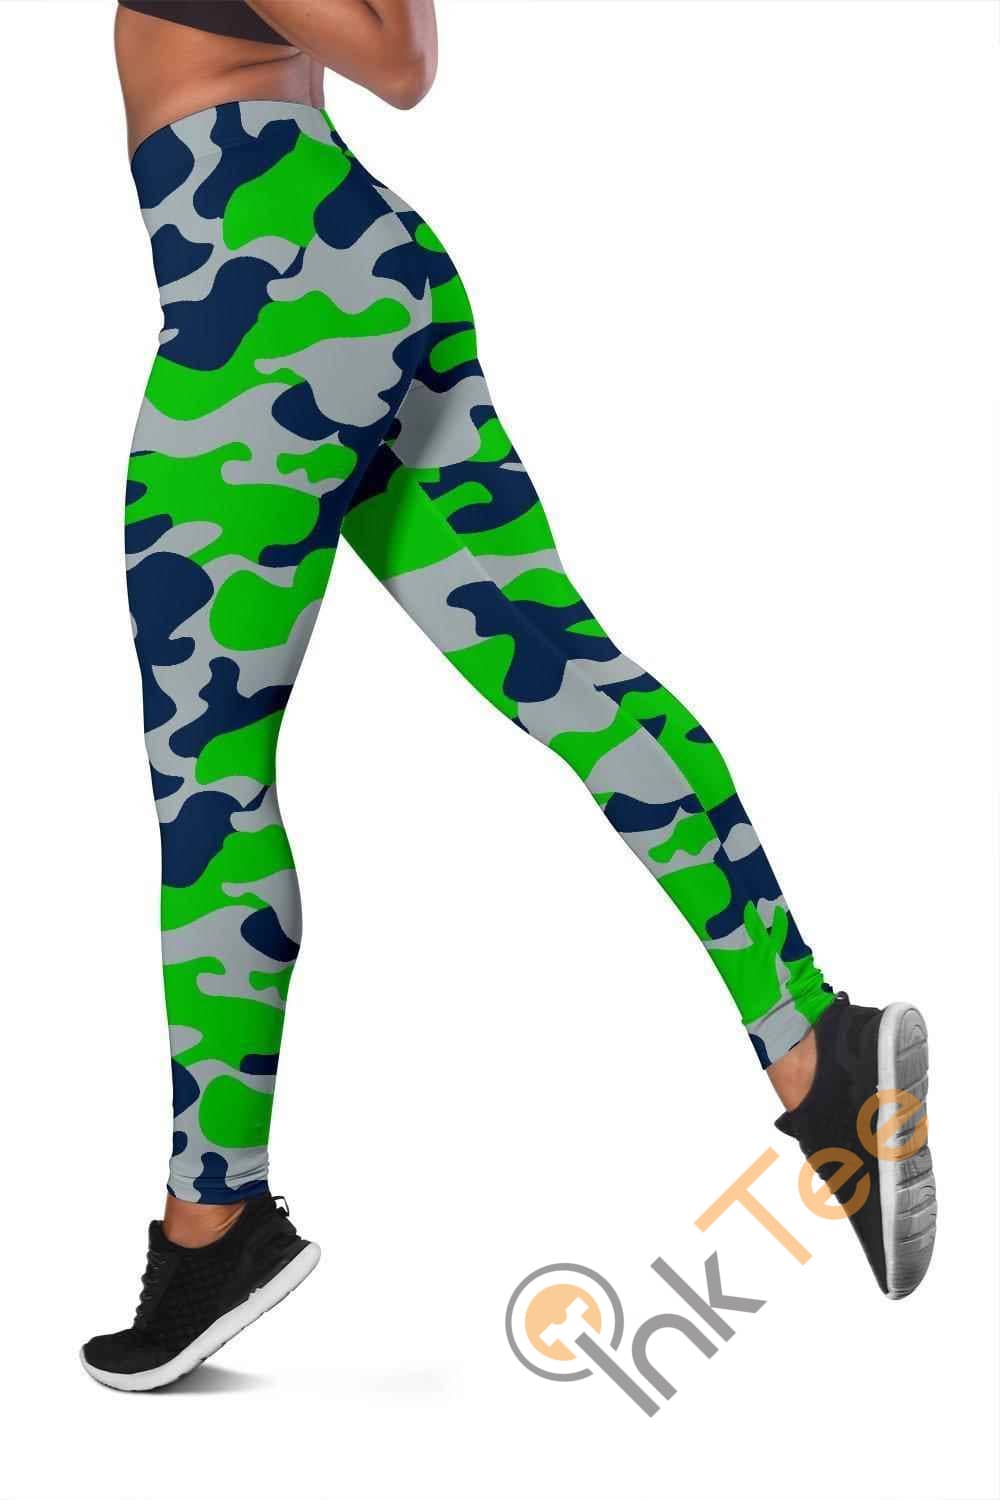 Inktee Store - Seattle Seahawks Inspired Tru Camo 3D All Over Print For Yoga Fitness Fashion Women'S Leggings Image